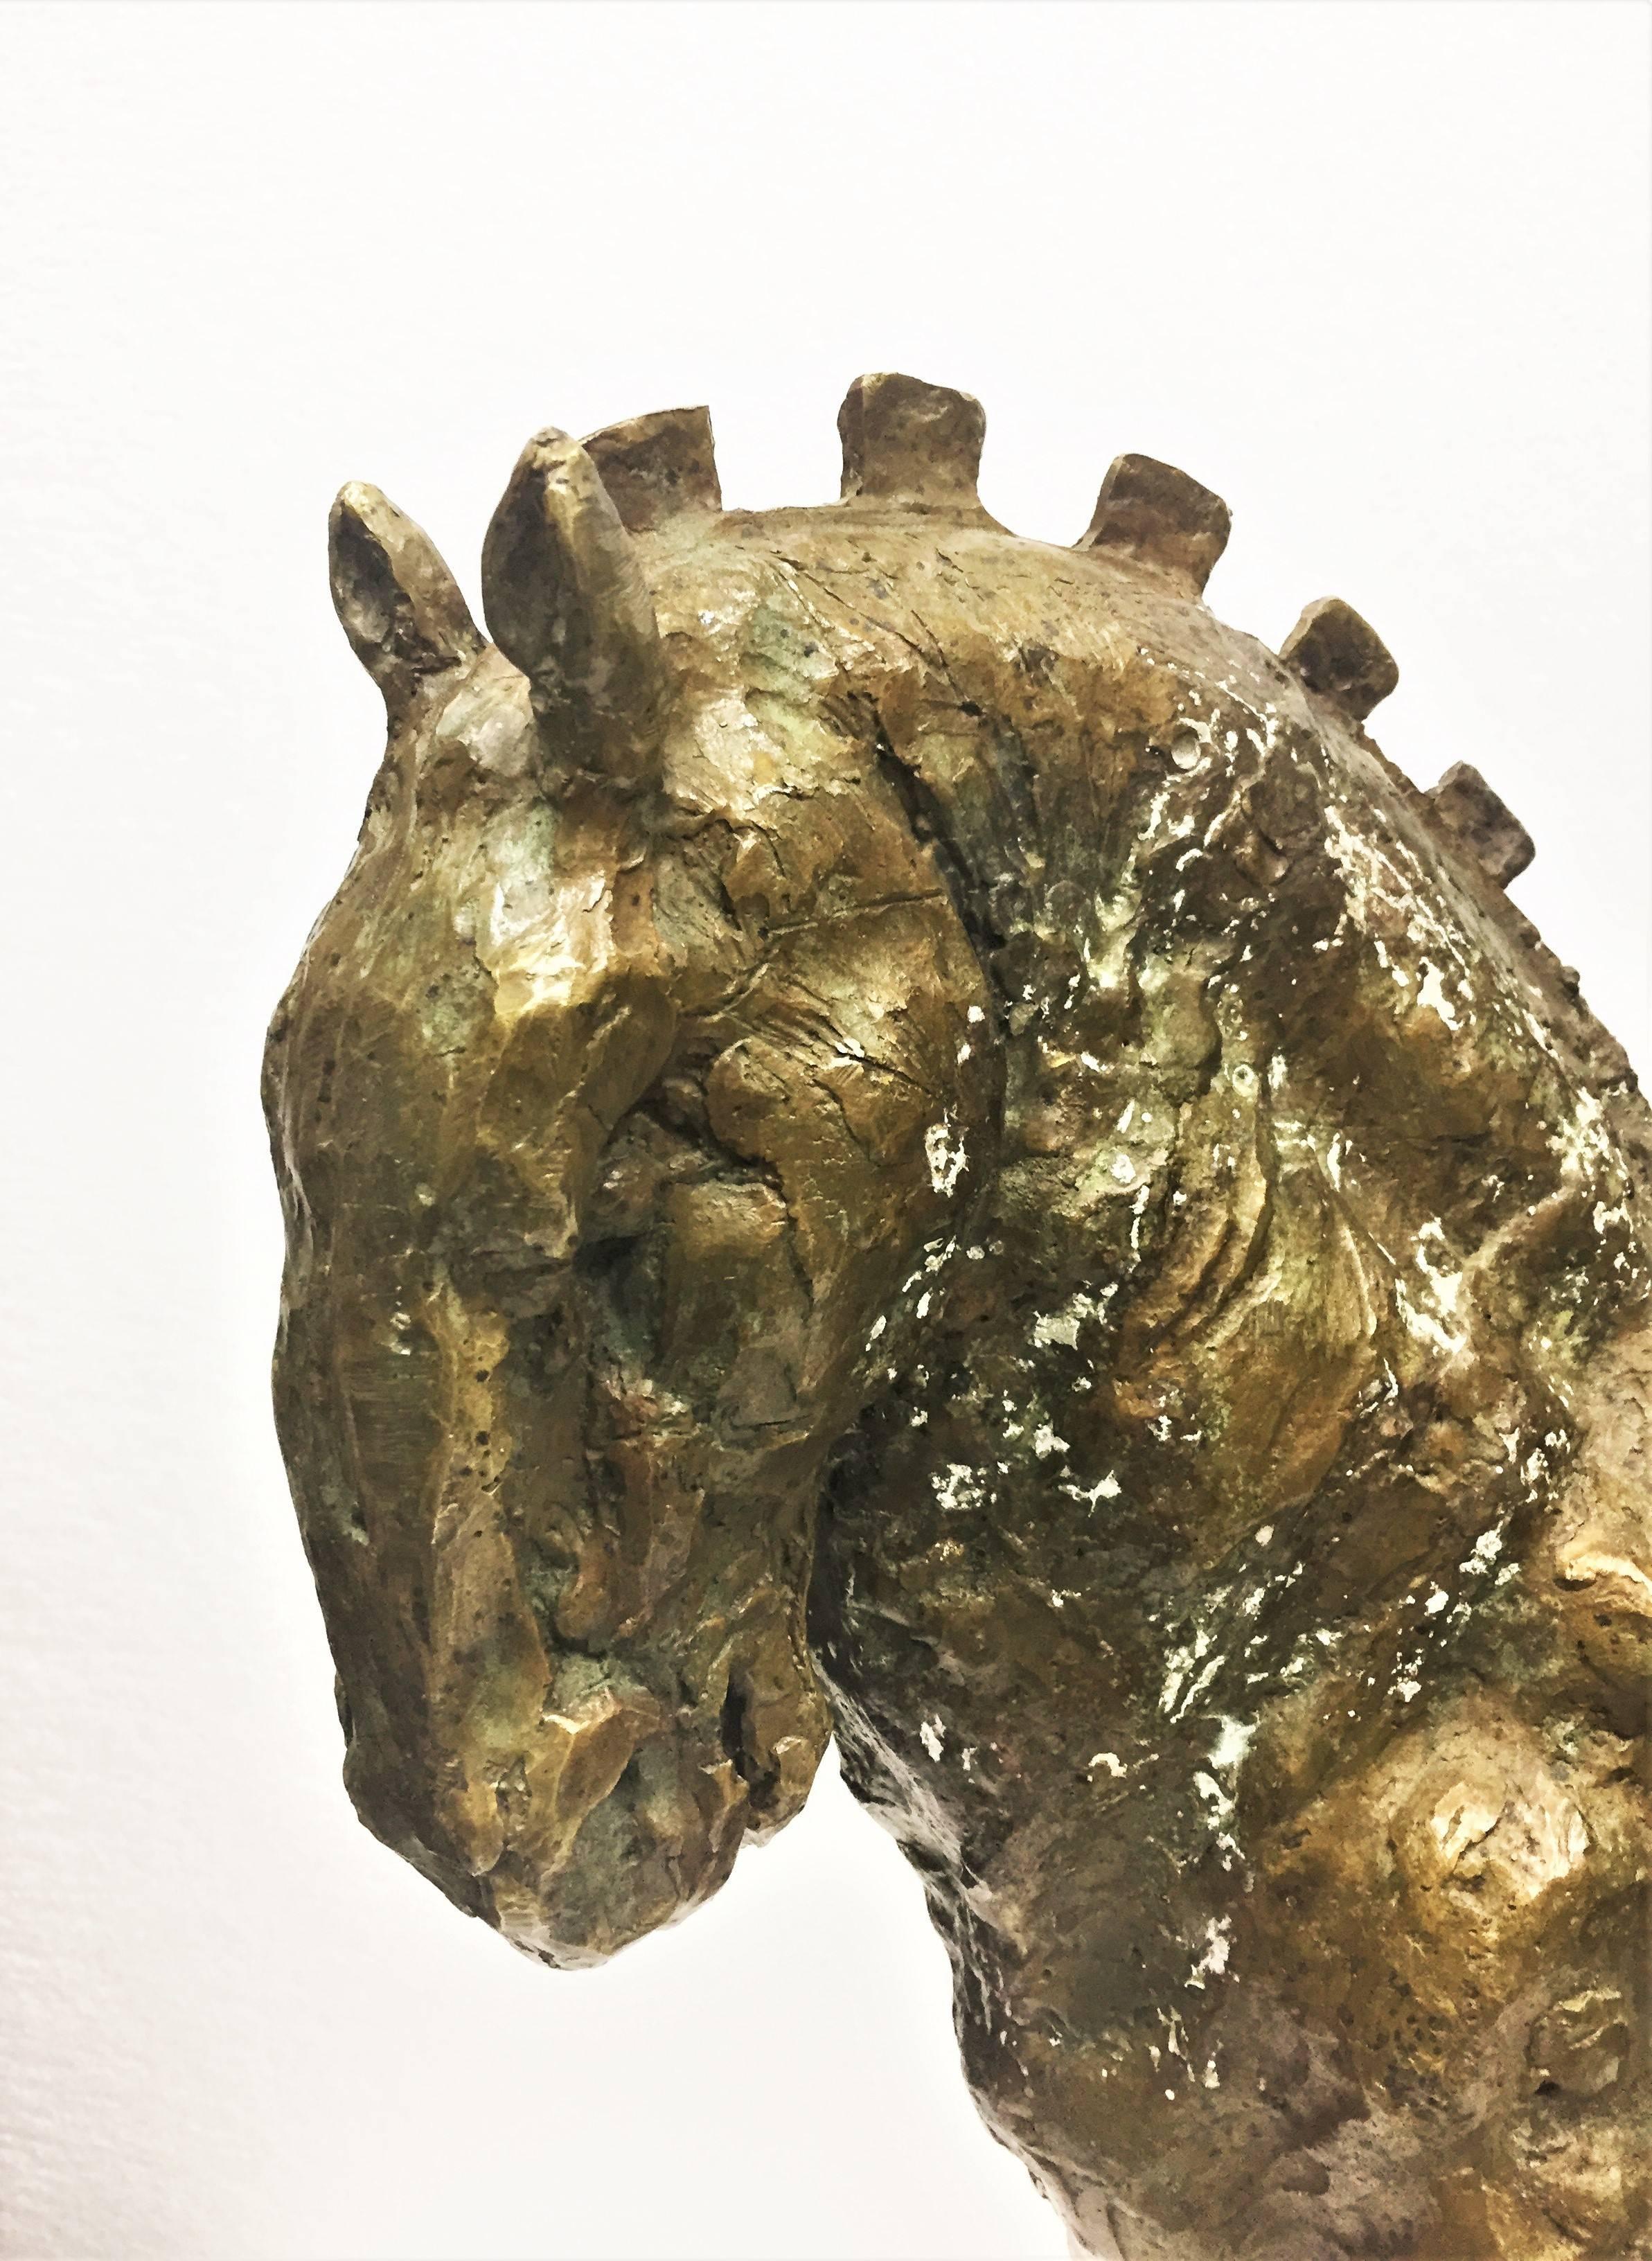 Hombre a Caballo, circa 1998
Bronze sculpture with light verdigris-type patina. Inscribed twice: Javier Marin - on equestrian’s left shoulder and on horse's right rump. 

Javier Marin (Mexican, b.1962), a world-famous Mexican artist was born in 1962